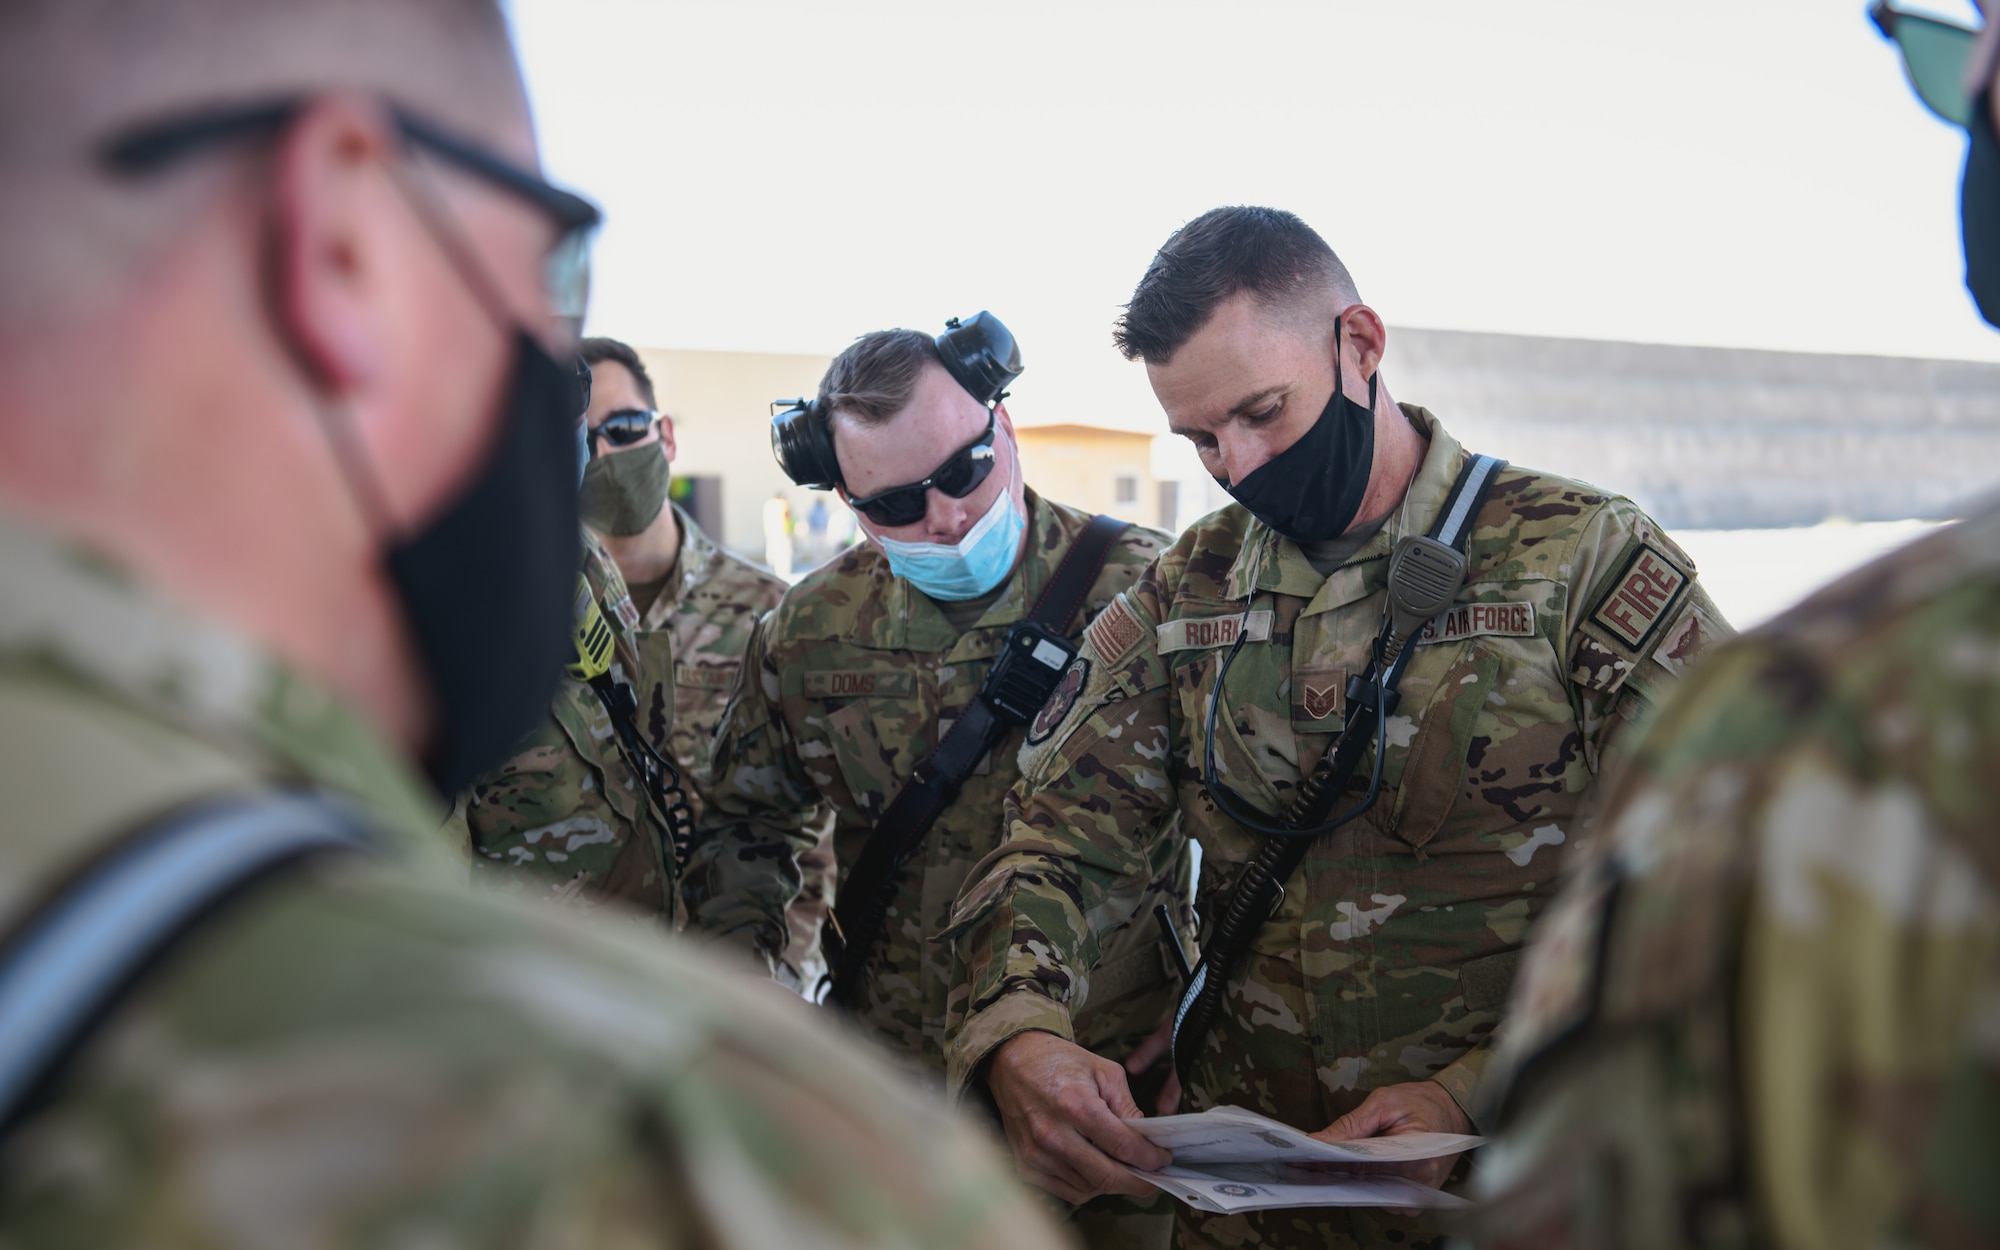 Airmen look at documents.